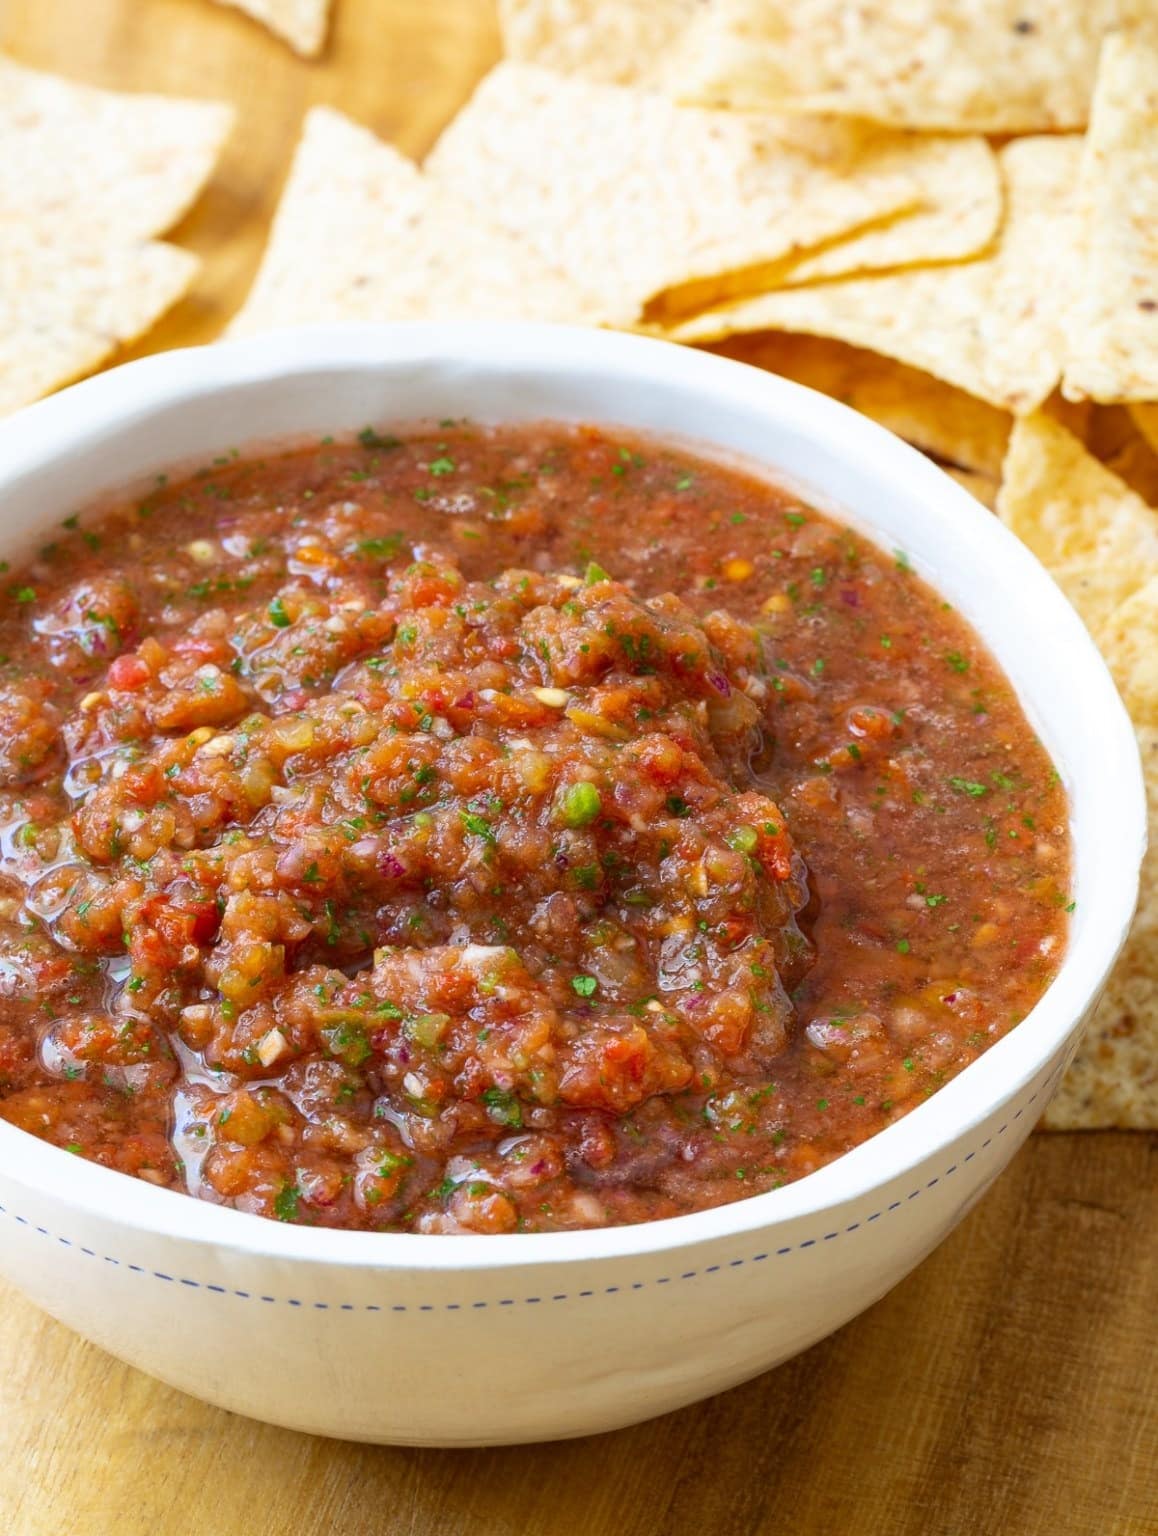 Bowl of homemade salsa with tomatoes, onions, peppers and spices